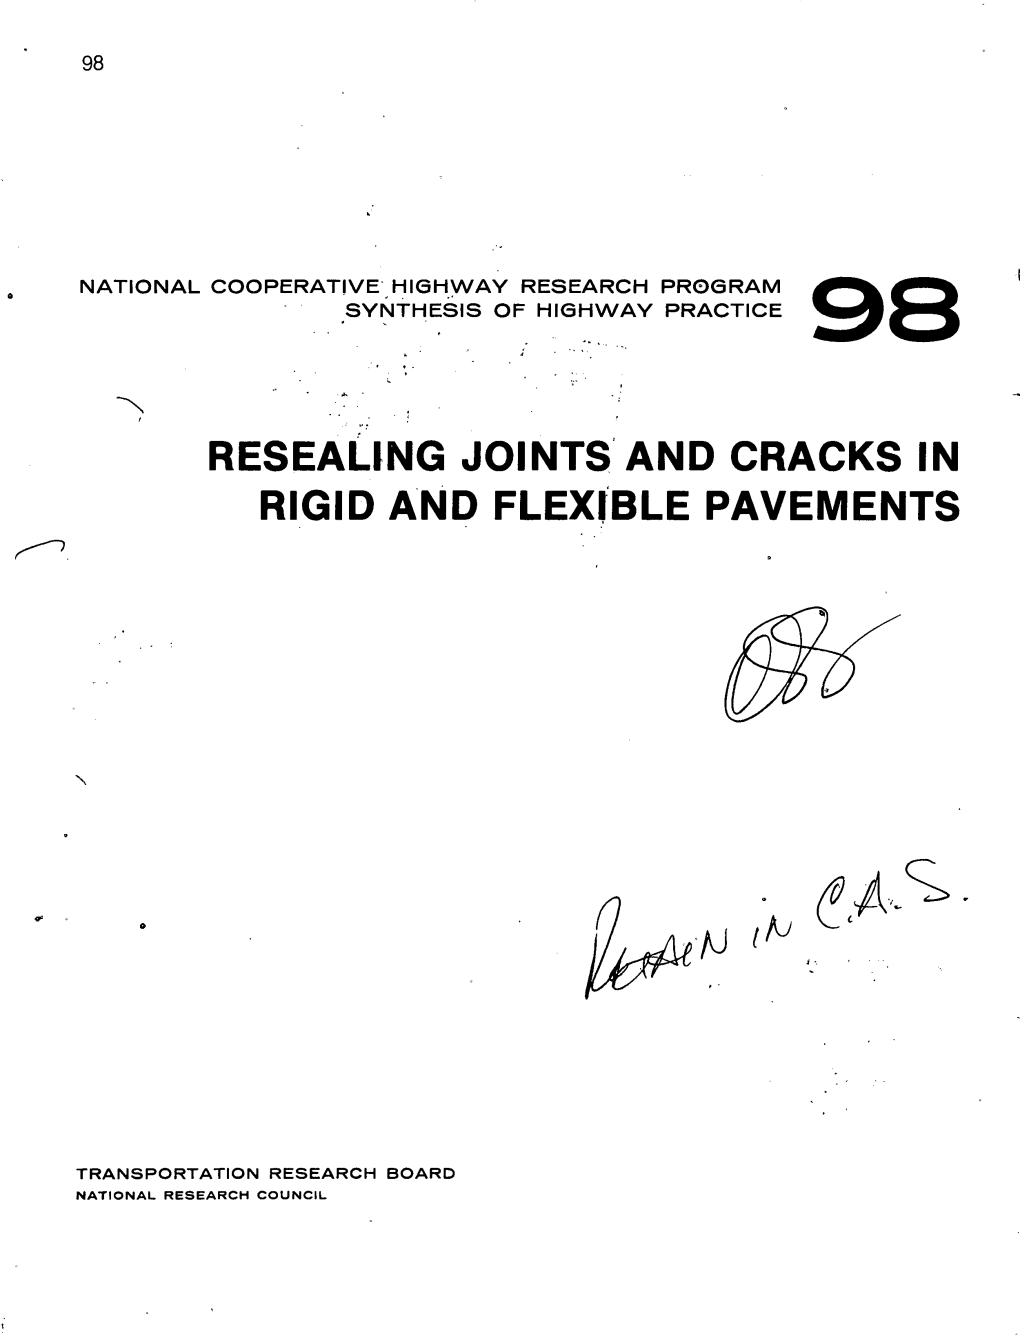 Resealing Joints and Cracks in Rigid and Flexible Pavements